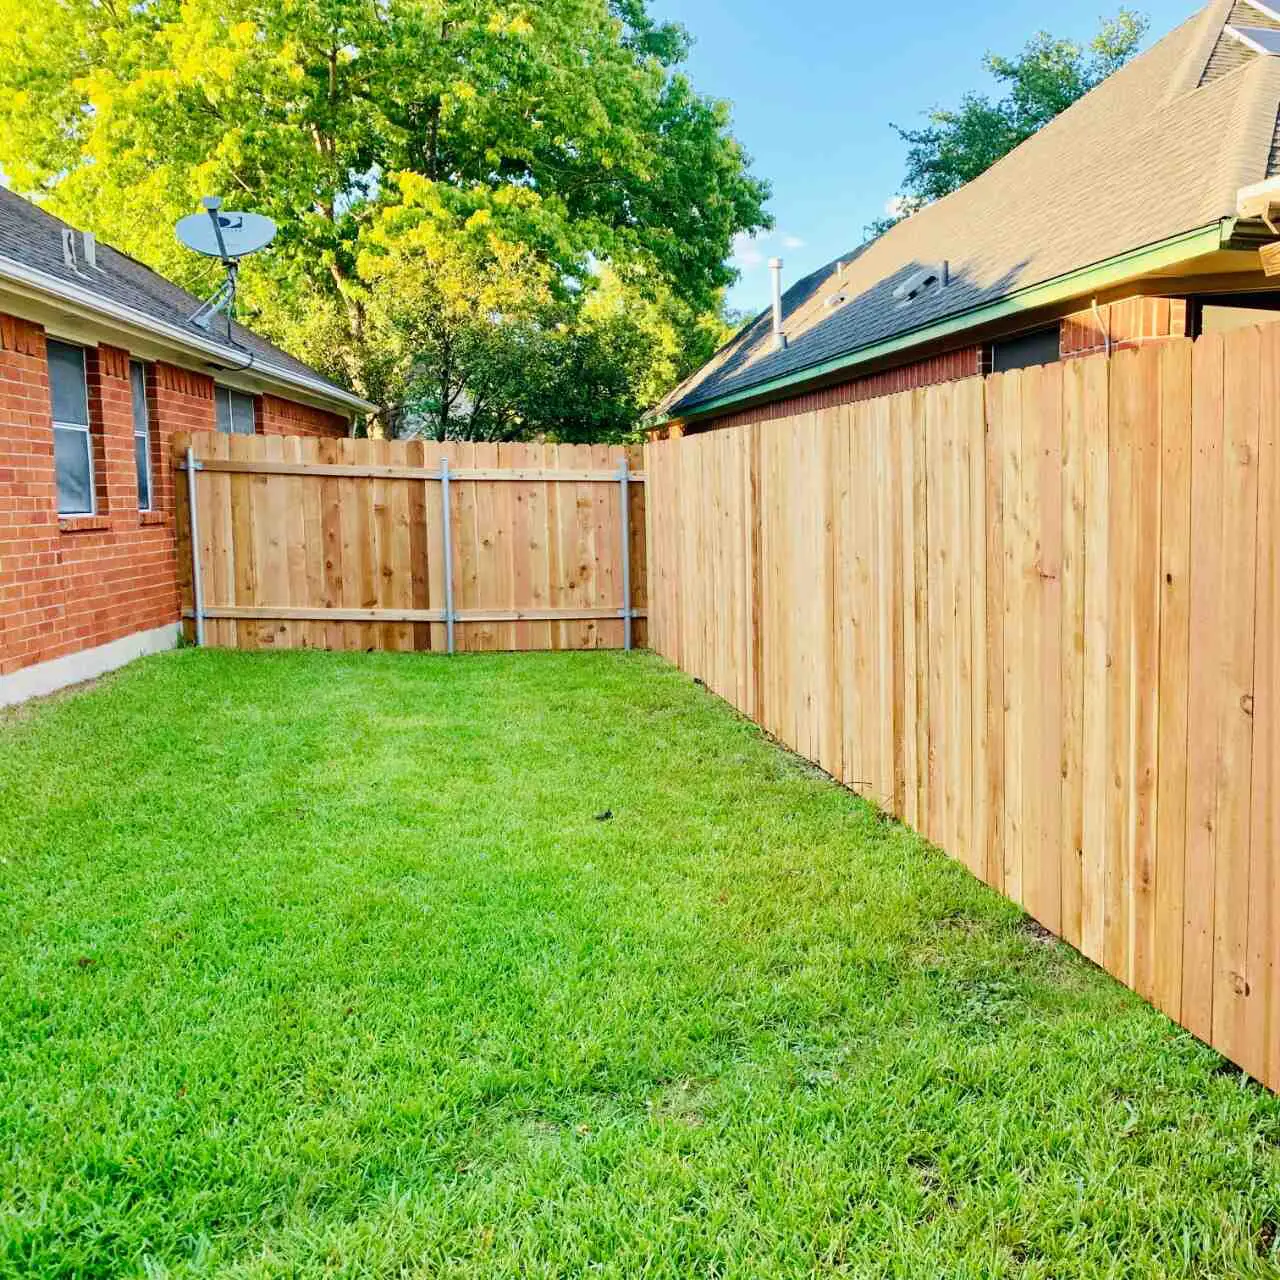 Six foot privacy fence dog ear style with metal posts